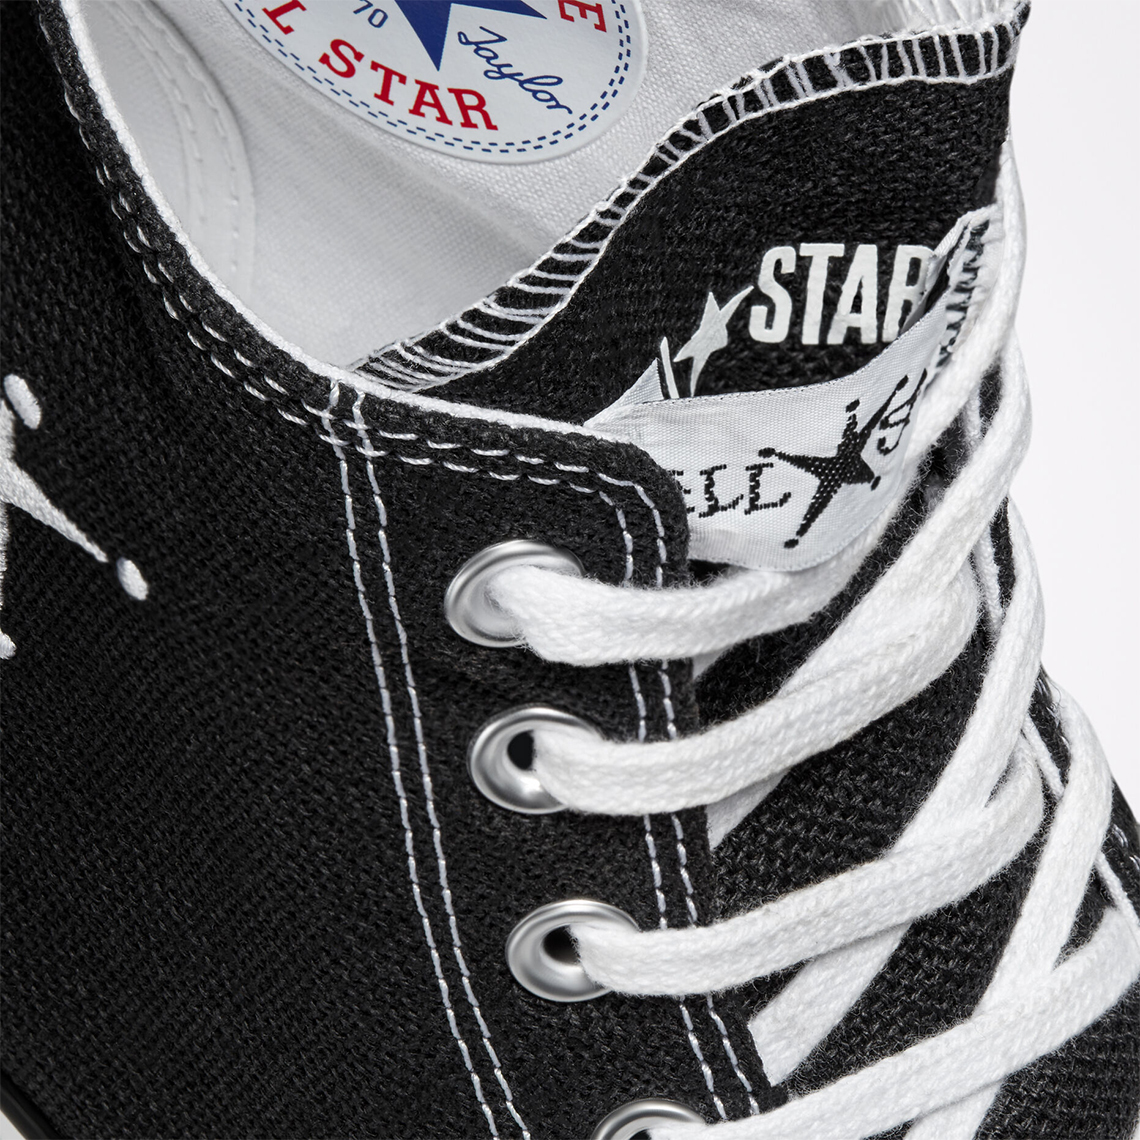 Stussy Converse Chuck 70 + One Star Release Date | SneakerNews.com